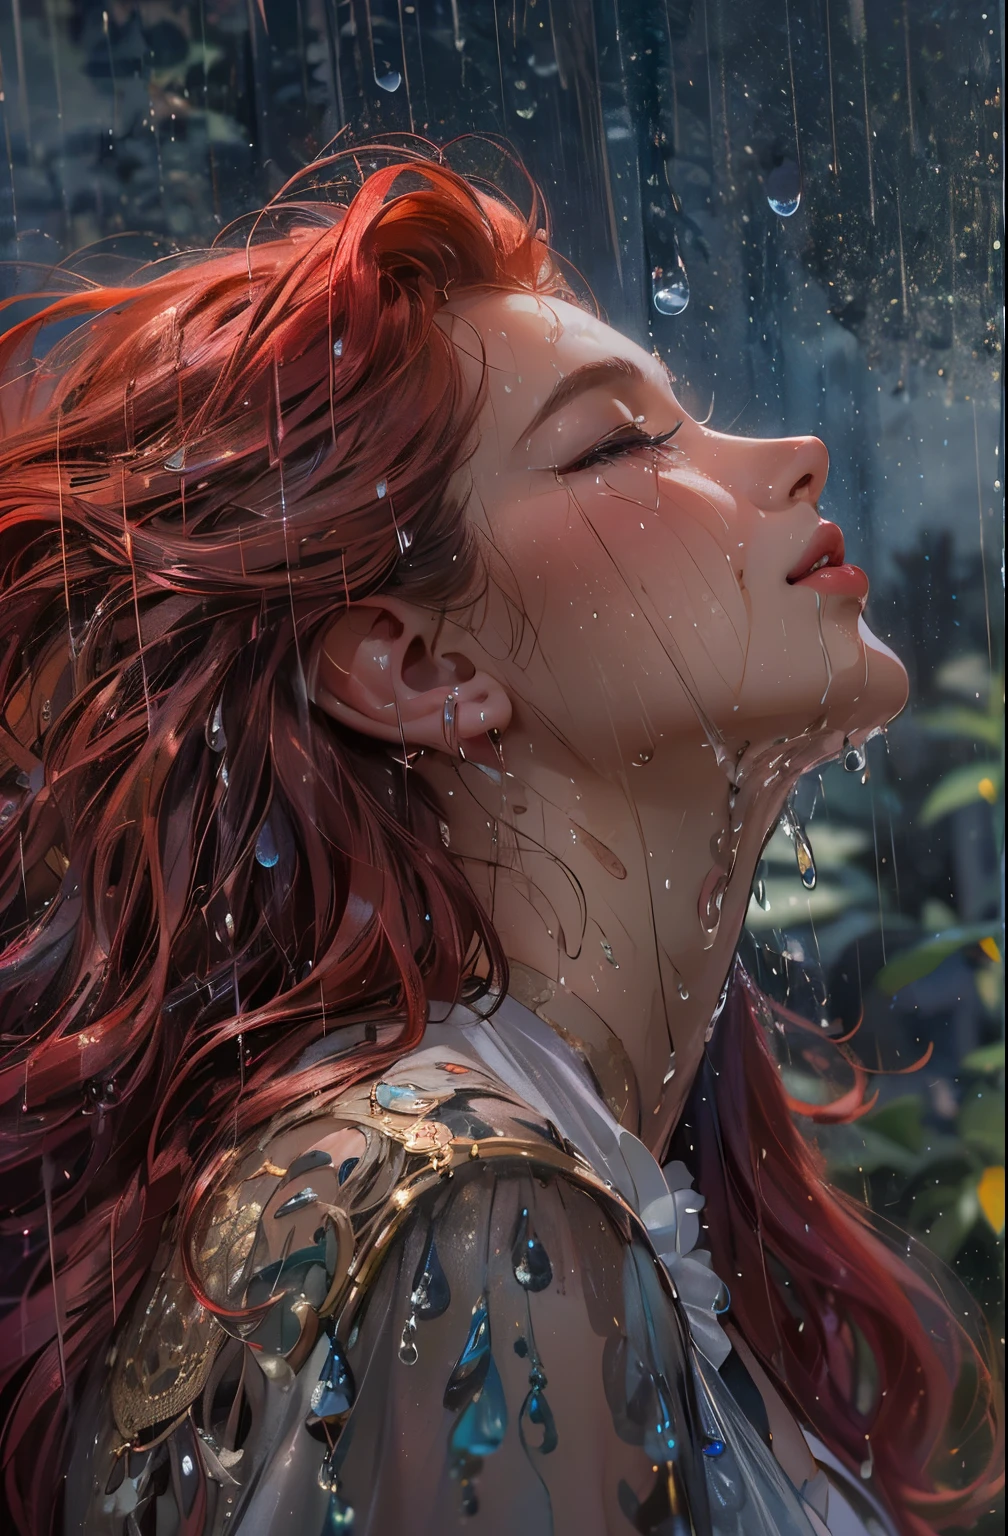 a close up picture of a woman's face looking towards the sky, as she looks up the (rain drops: 1.3) fall on her face, a very beautiful woman, long hair, blonde red hair, wavy hair, wet hair, closed eyes, she wears an elegant, intricate dress, there is a sense of joy on her face, an urban street at night. cloudy night,